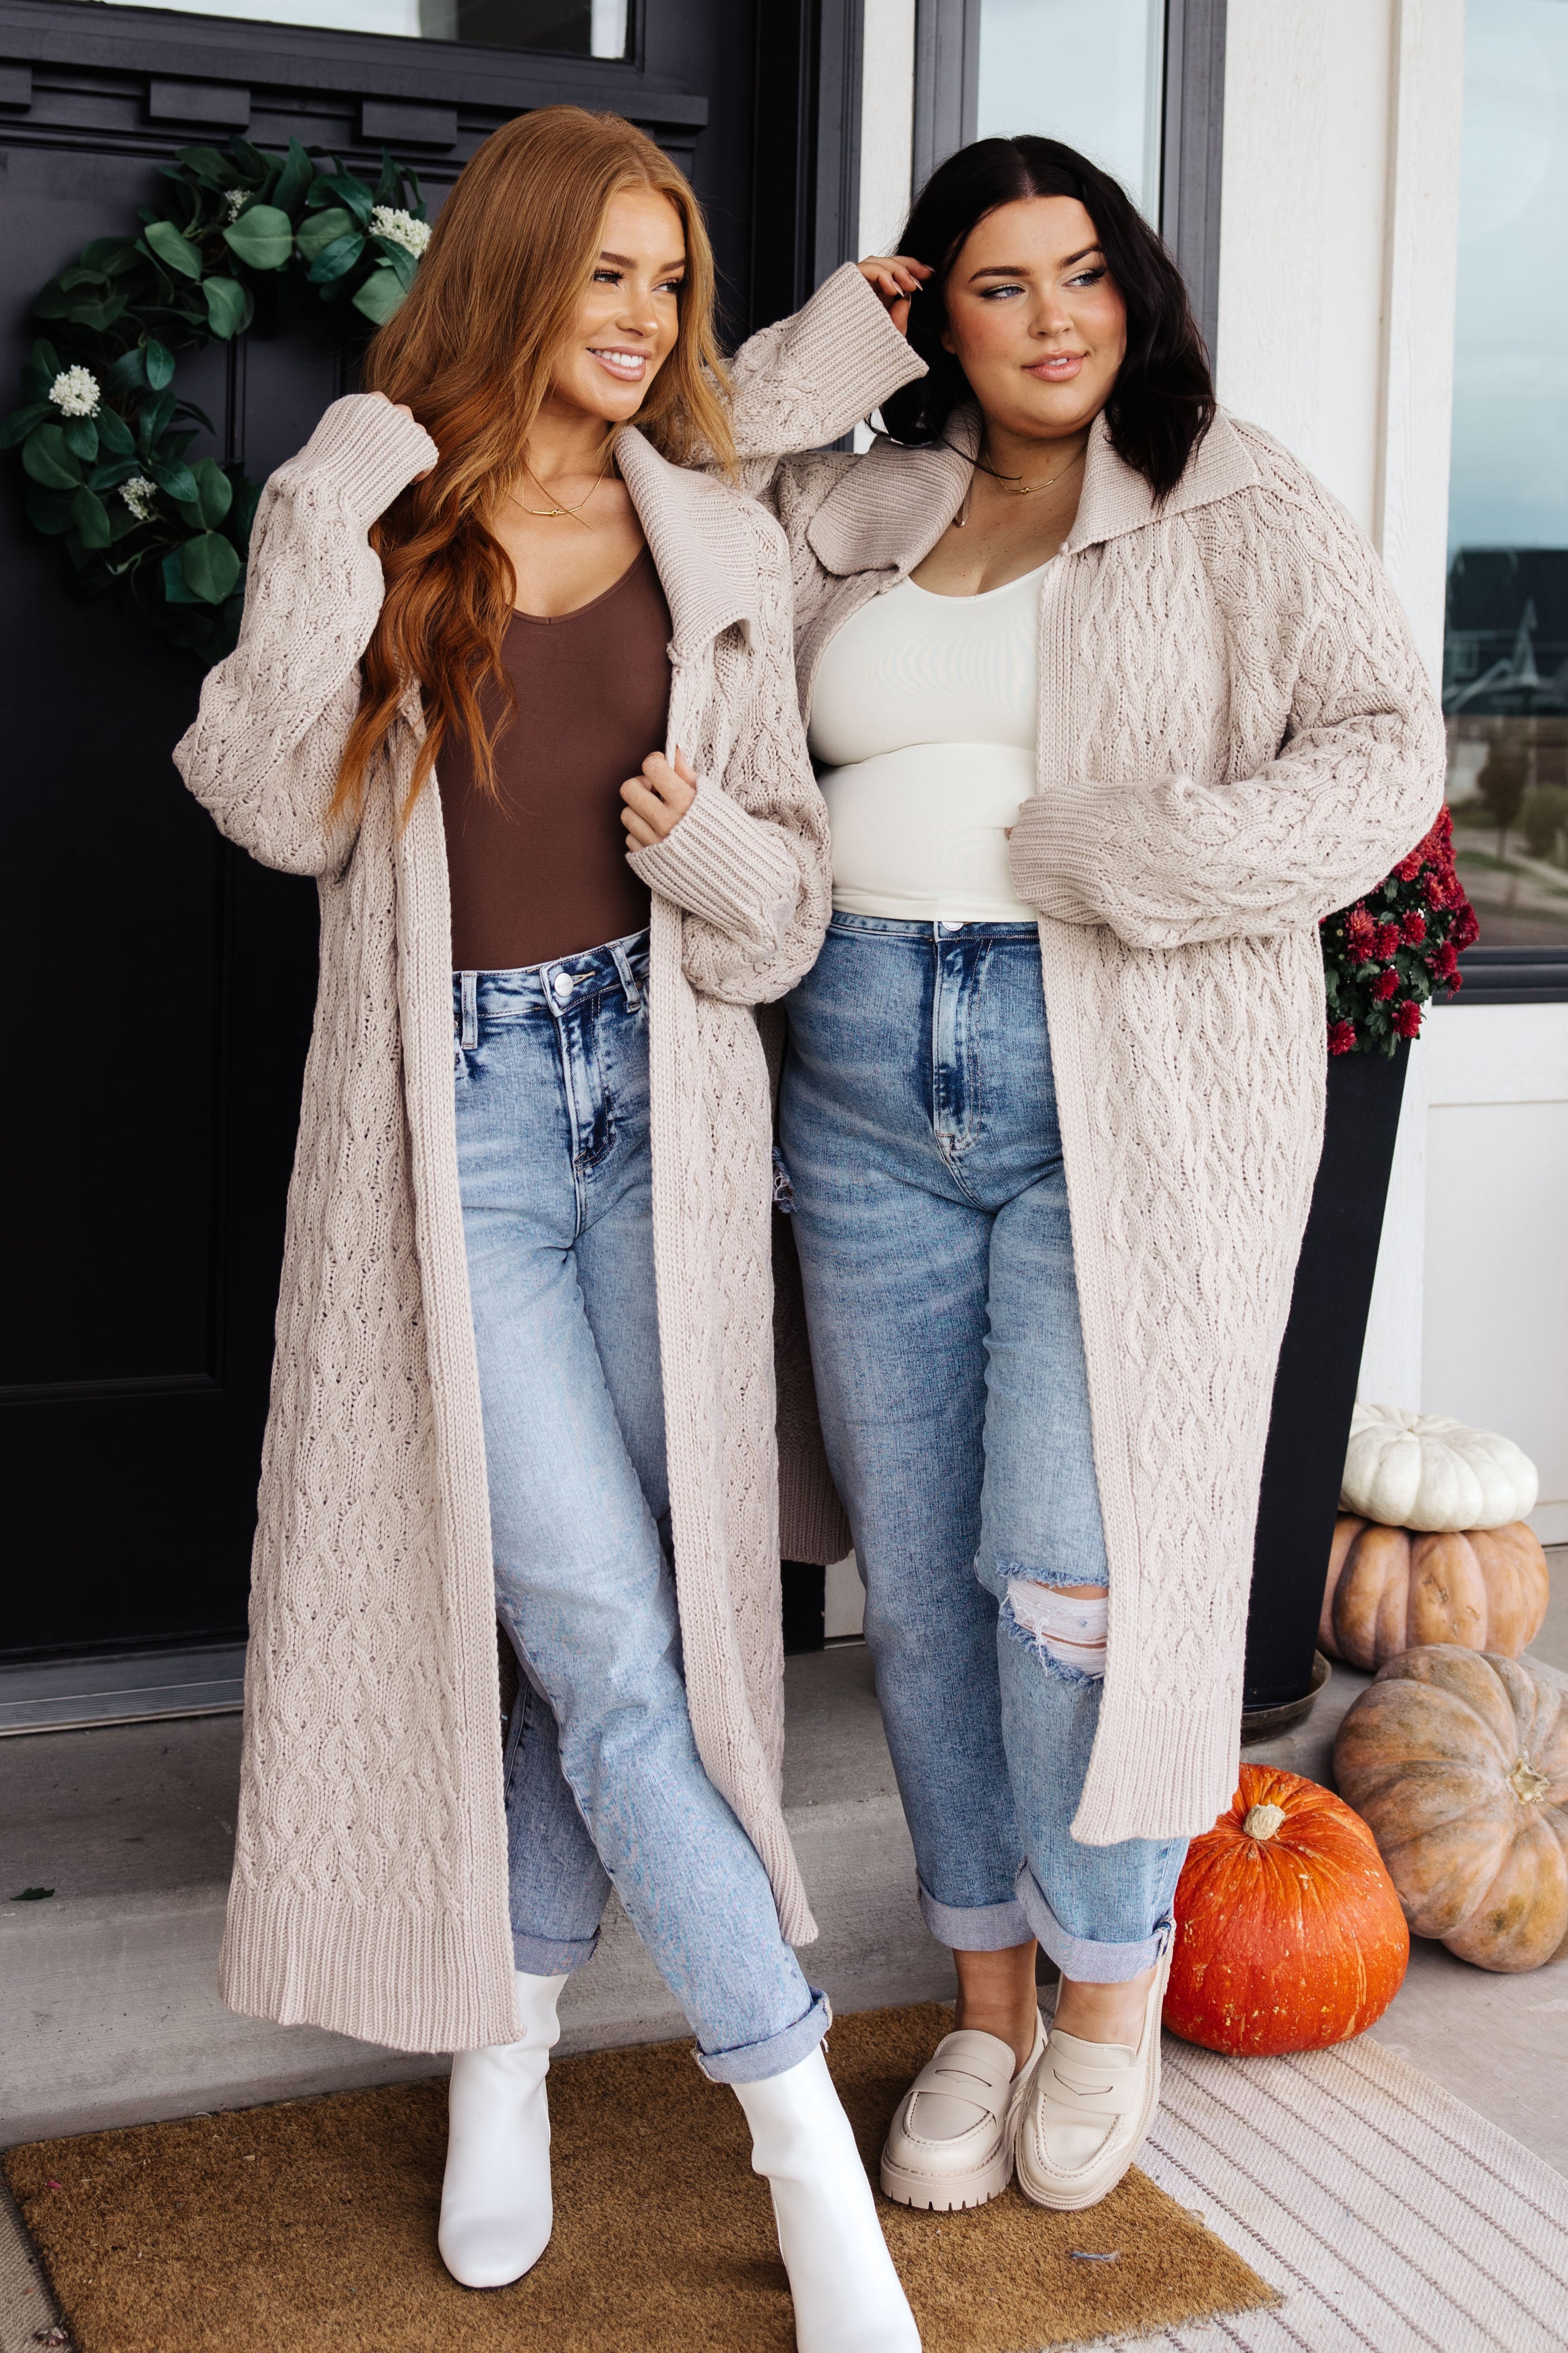 Sam Cable Knit Duster Cardigan